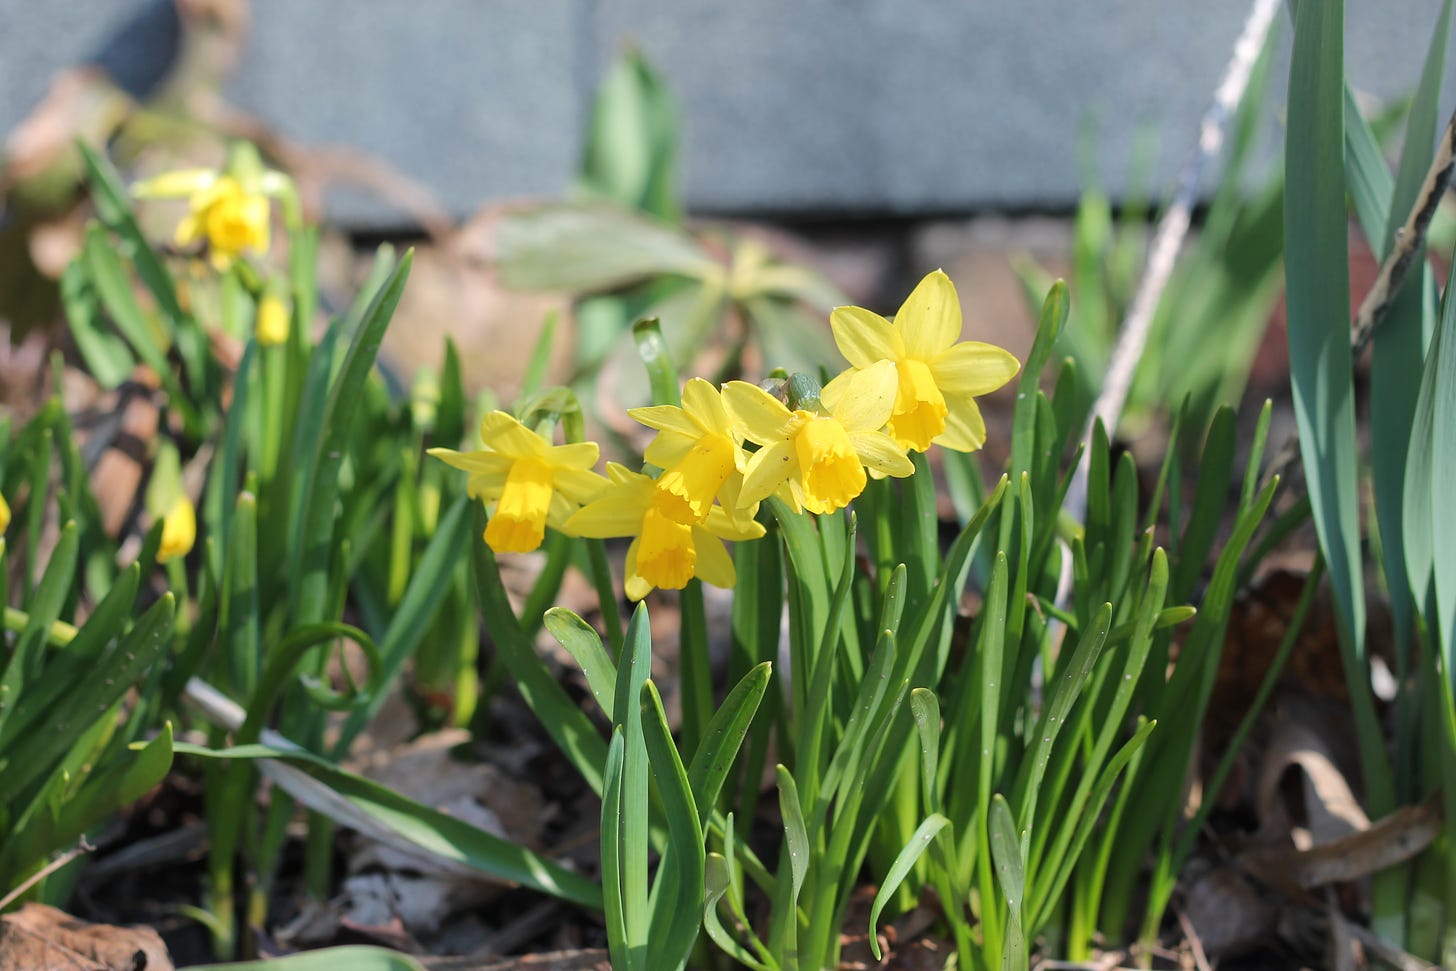 A cluster of small yellow daffodils